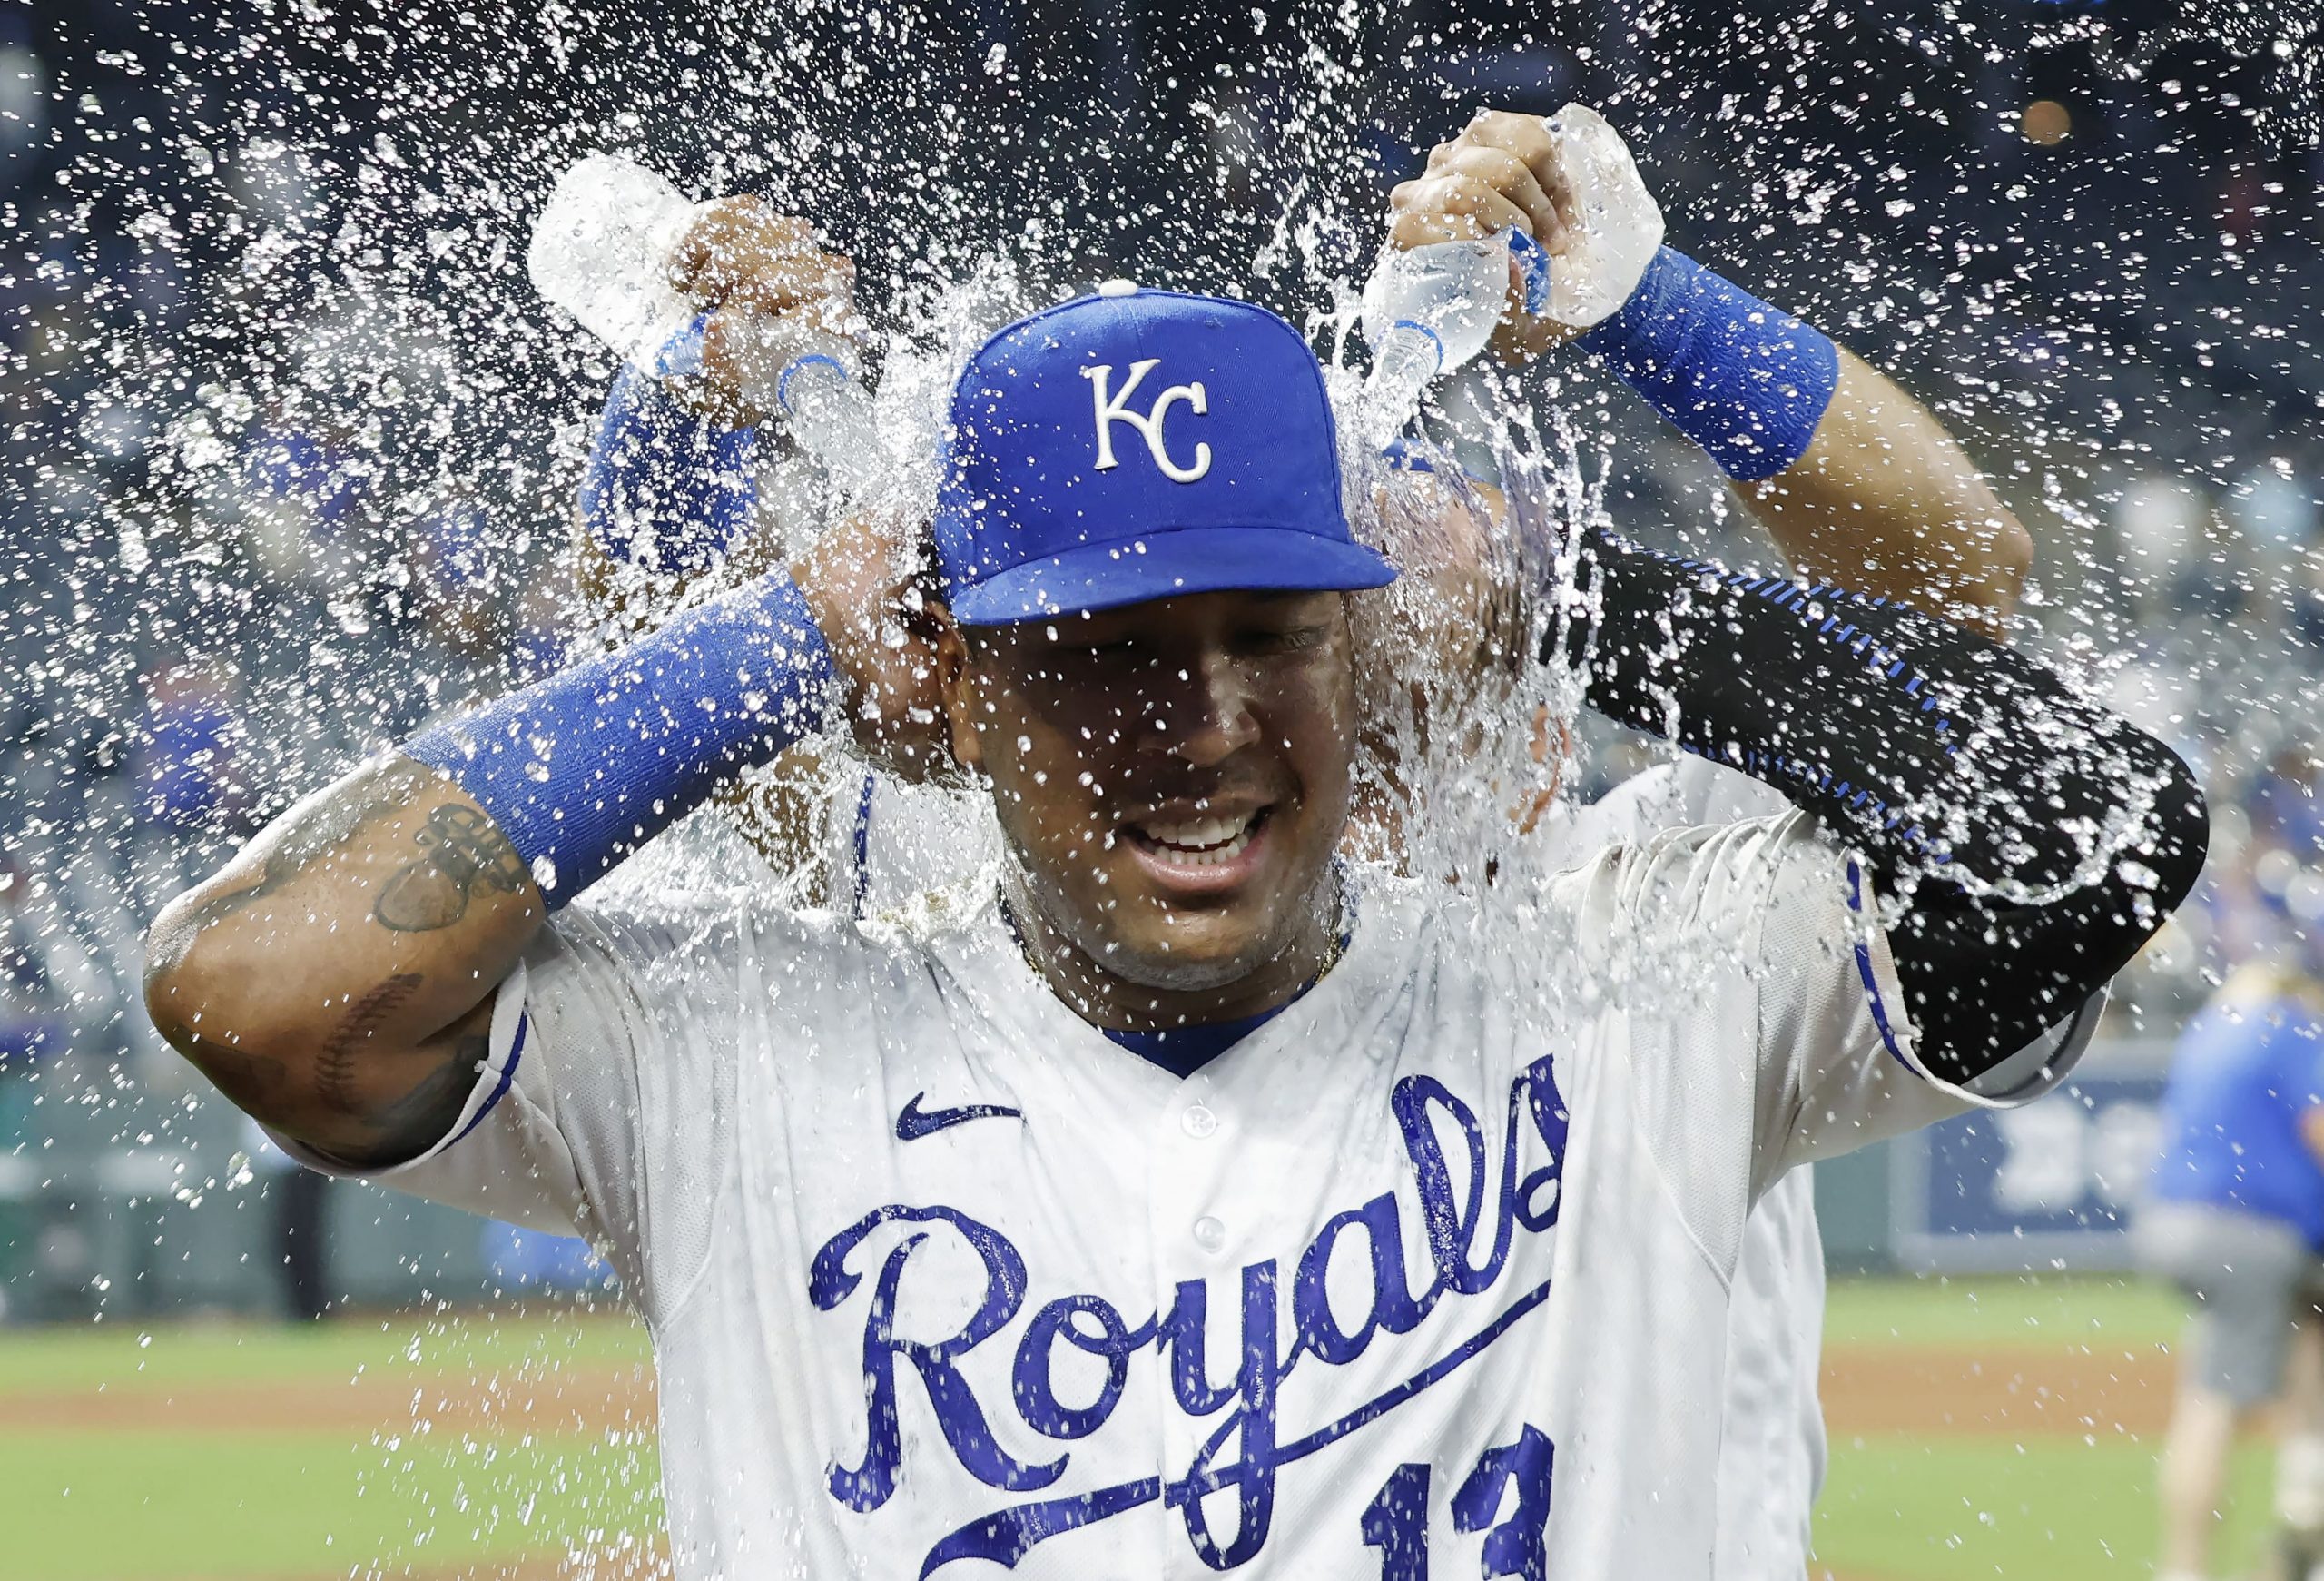 Kansas City Royals' Salvador Perez is doused with water following the team's 8-4 win over the New York Yankees in a baseball game at Kauffman Stadium in Kansas City, Mo.